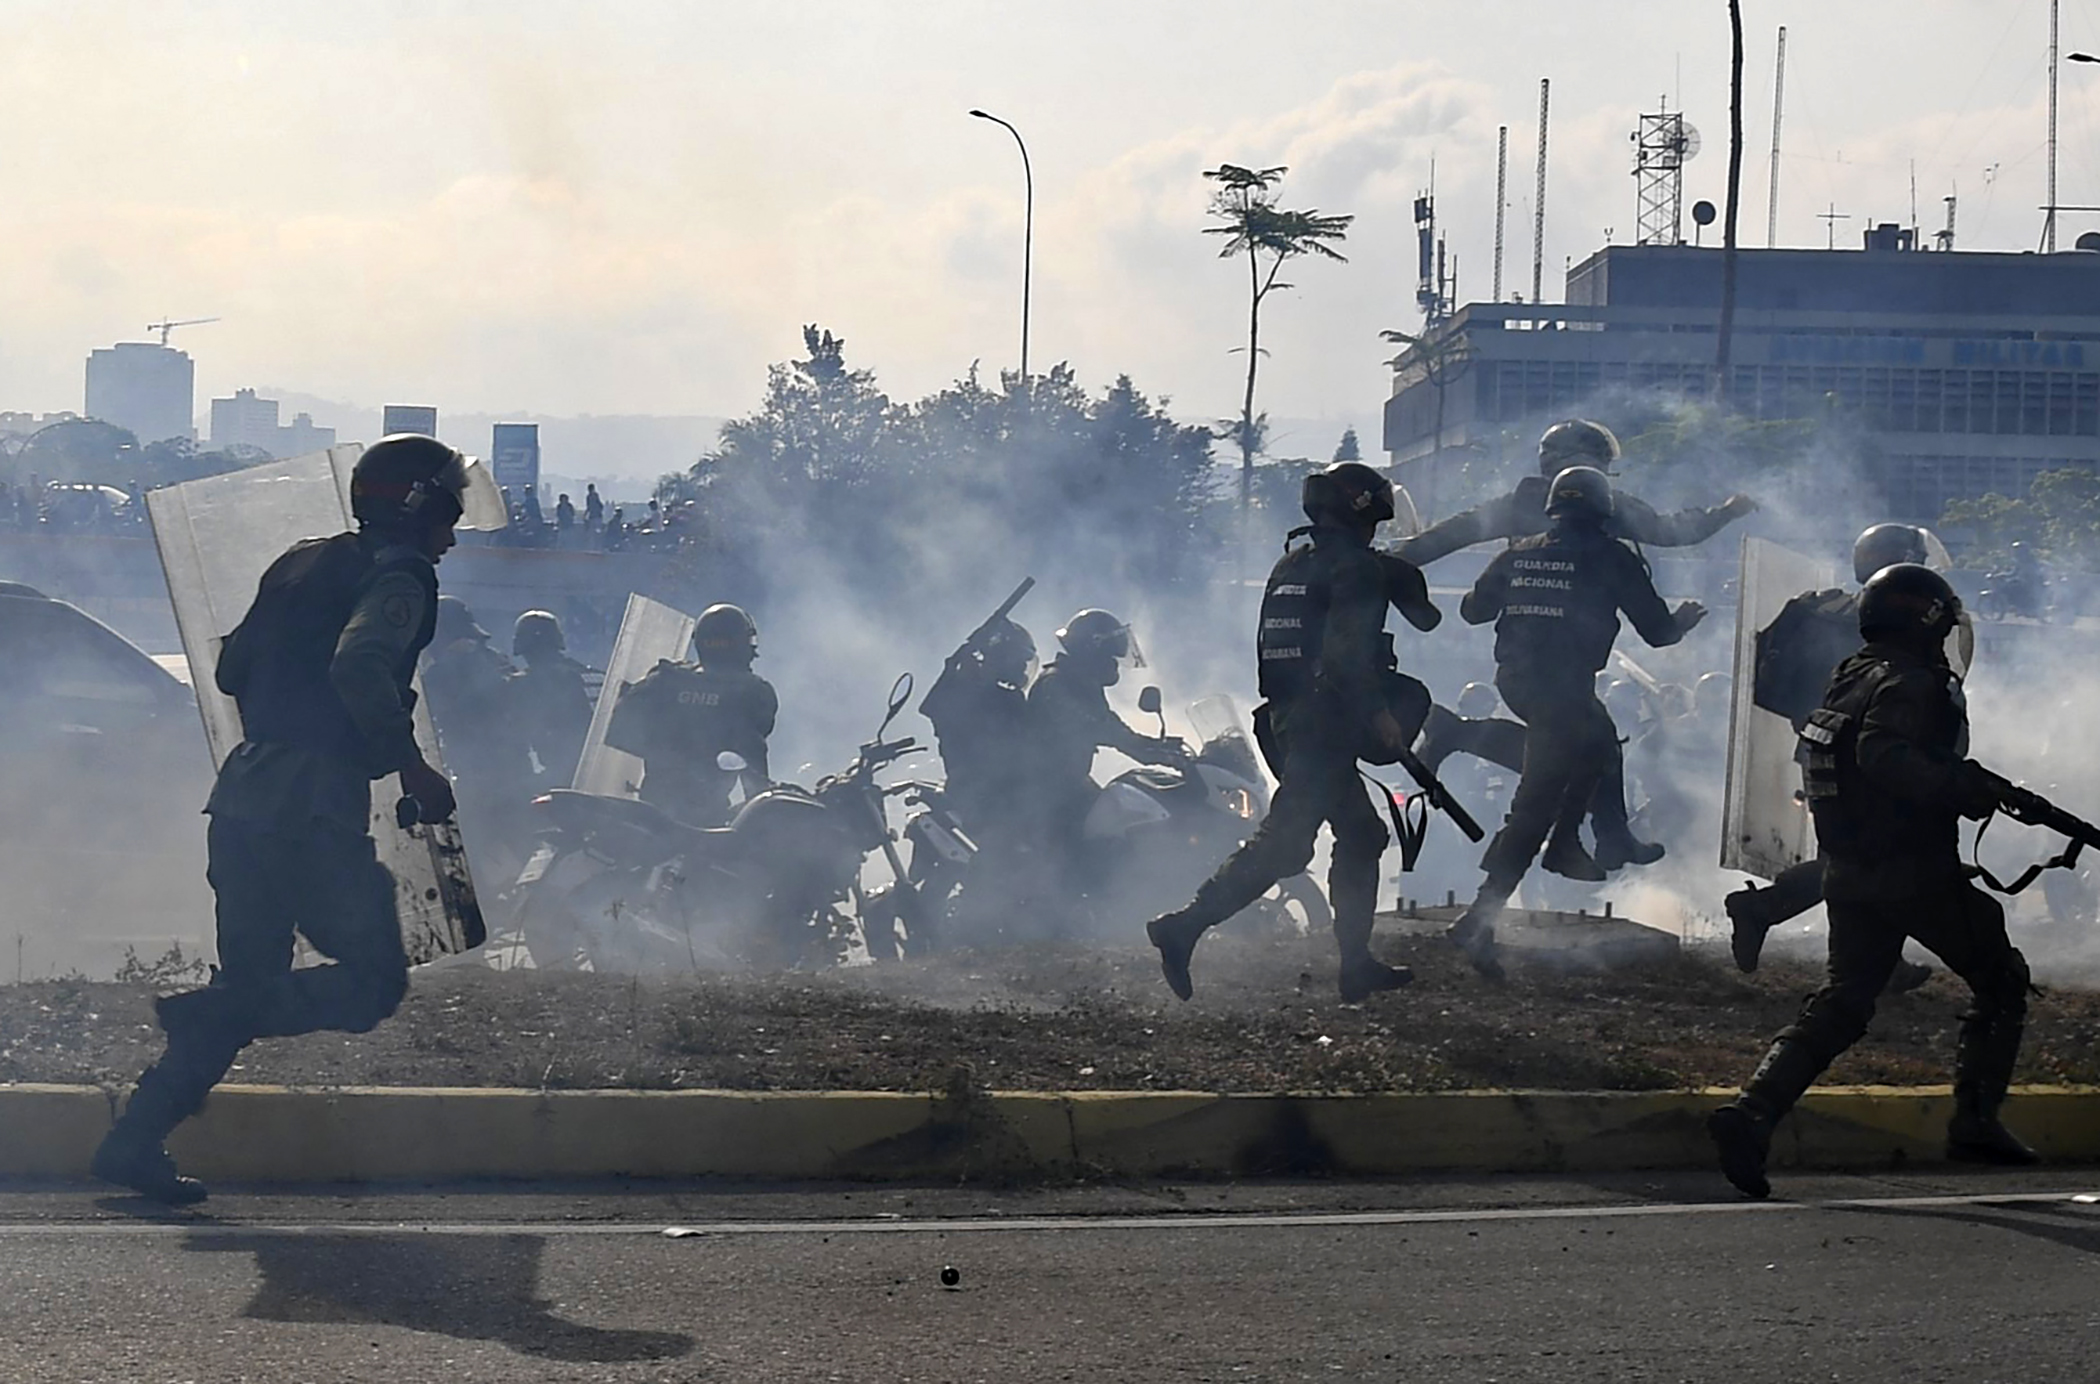 Members of the Bolivarian National Guard loyal to Venezuelan President Nicolas Maduro run under a cloud of tear gas after being repelled with rifle fire by guards supporting Venezuelan opposition leader and self-proclaimed acting president Juan Guaido in front of La Carlota military base in Caracas on April 30, 2019. - Guaido said on Tuesday that troops had joined his campaign to oust President Nicolas Maduro as the government vowed to put down what it called an attempted coup. (Photo by Yuri CORTEZ / AFP) (Photo credit should read YURI CORTEZ/AFP/Getty Images)